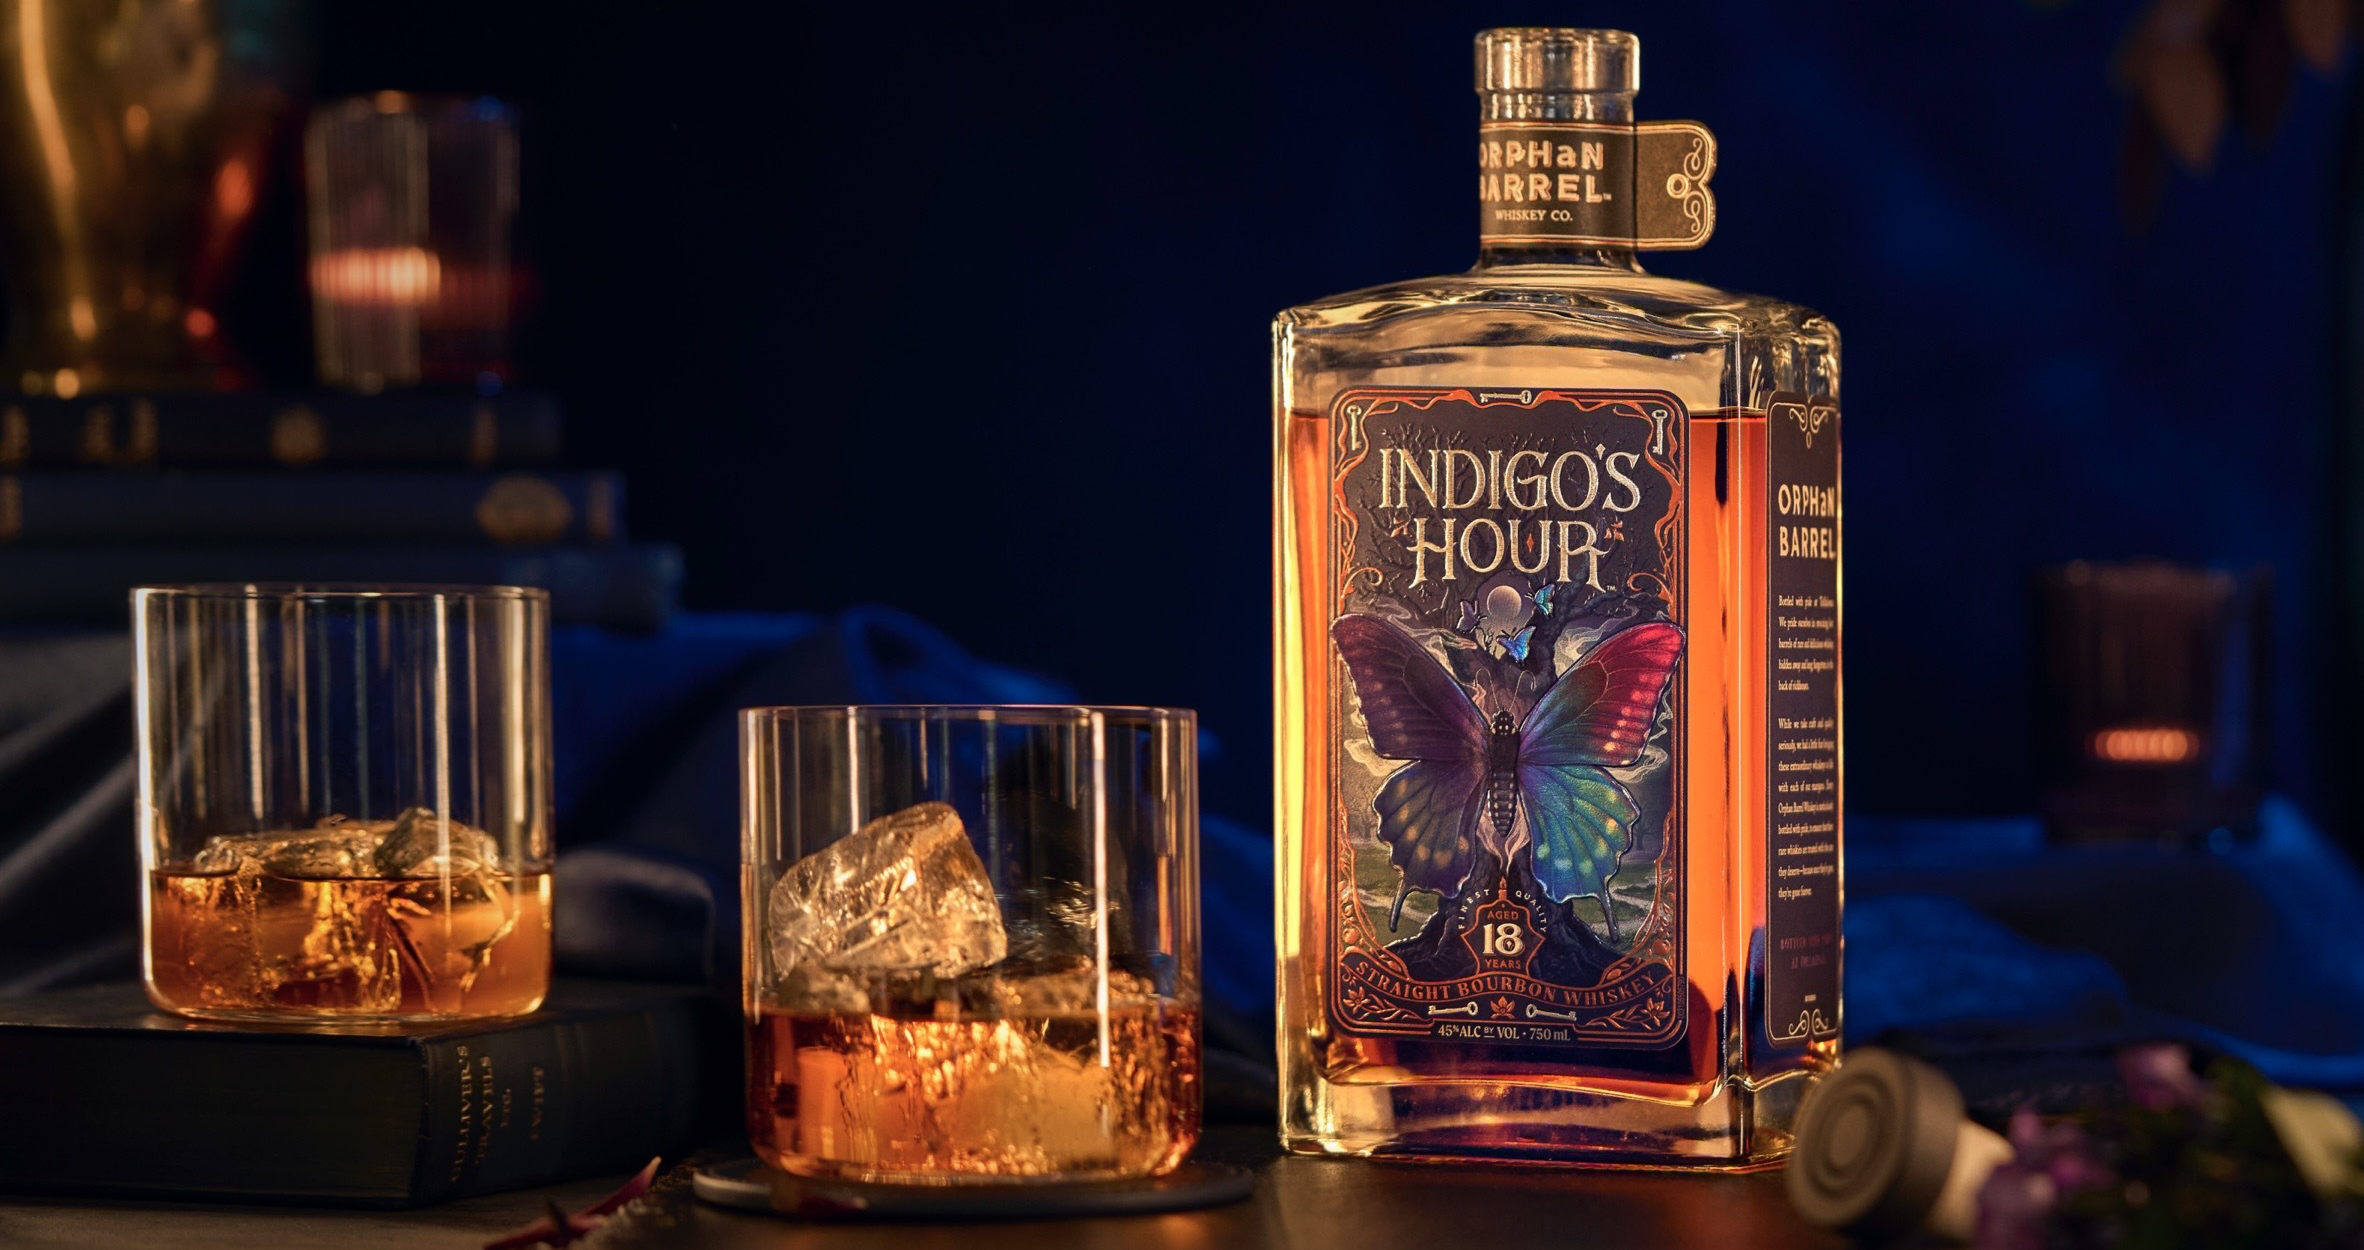 Introducing Indigo’s Hour, A Rare, Limited-Edition Straight Bourbon Whiskey Transformed Through 18 Years of Barrel Aging